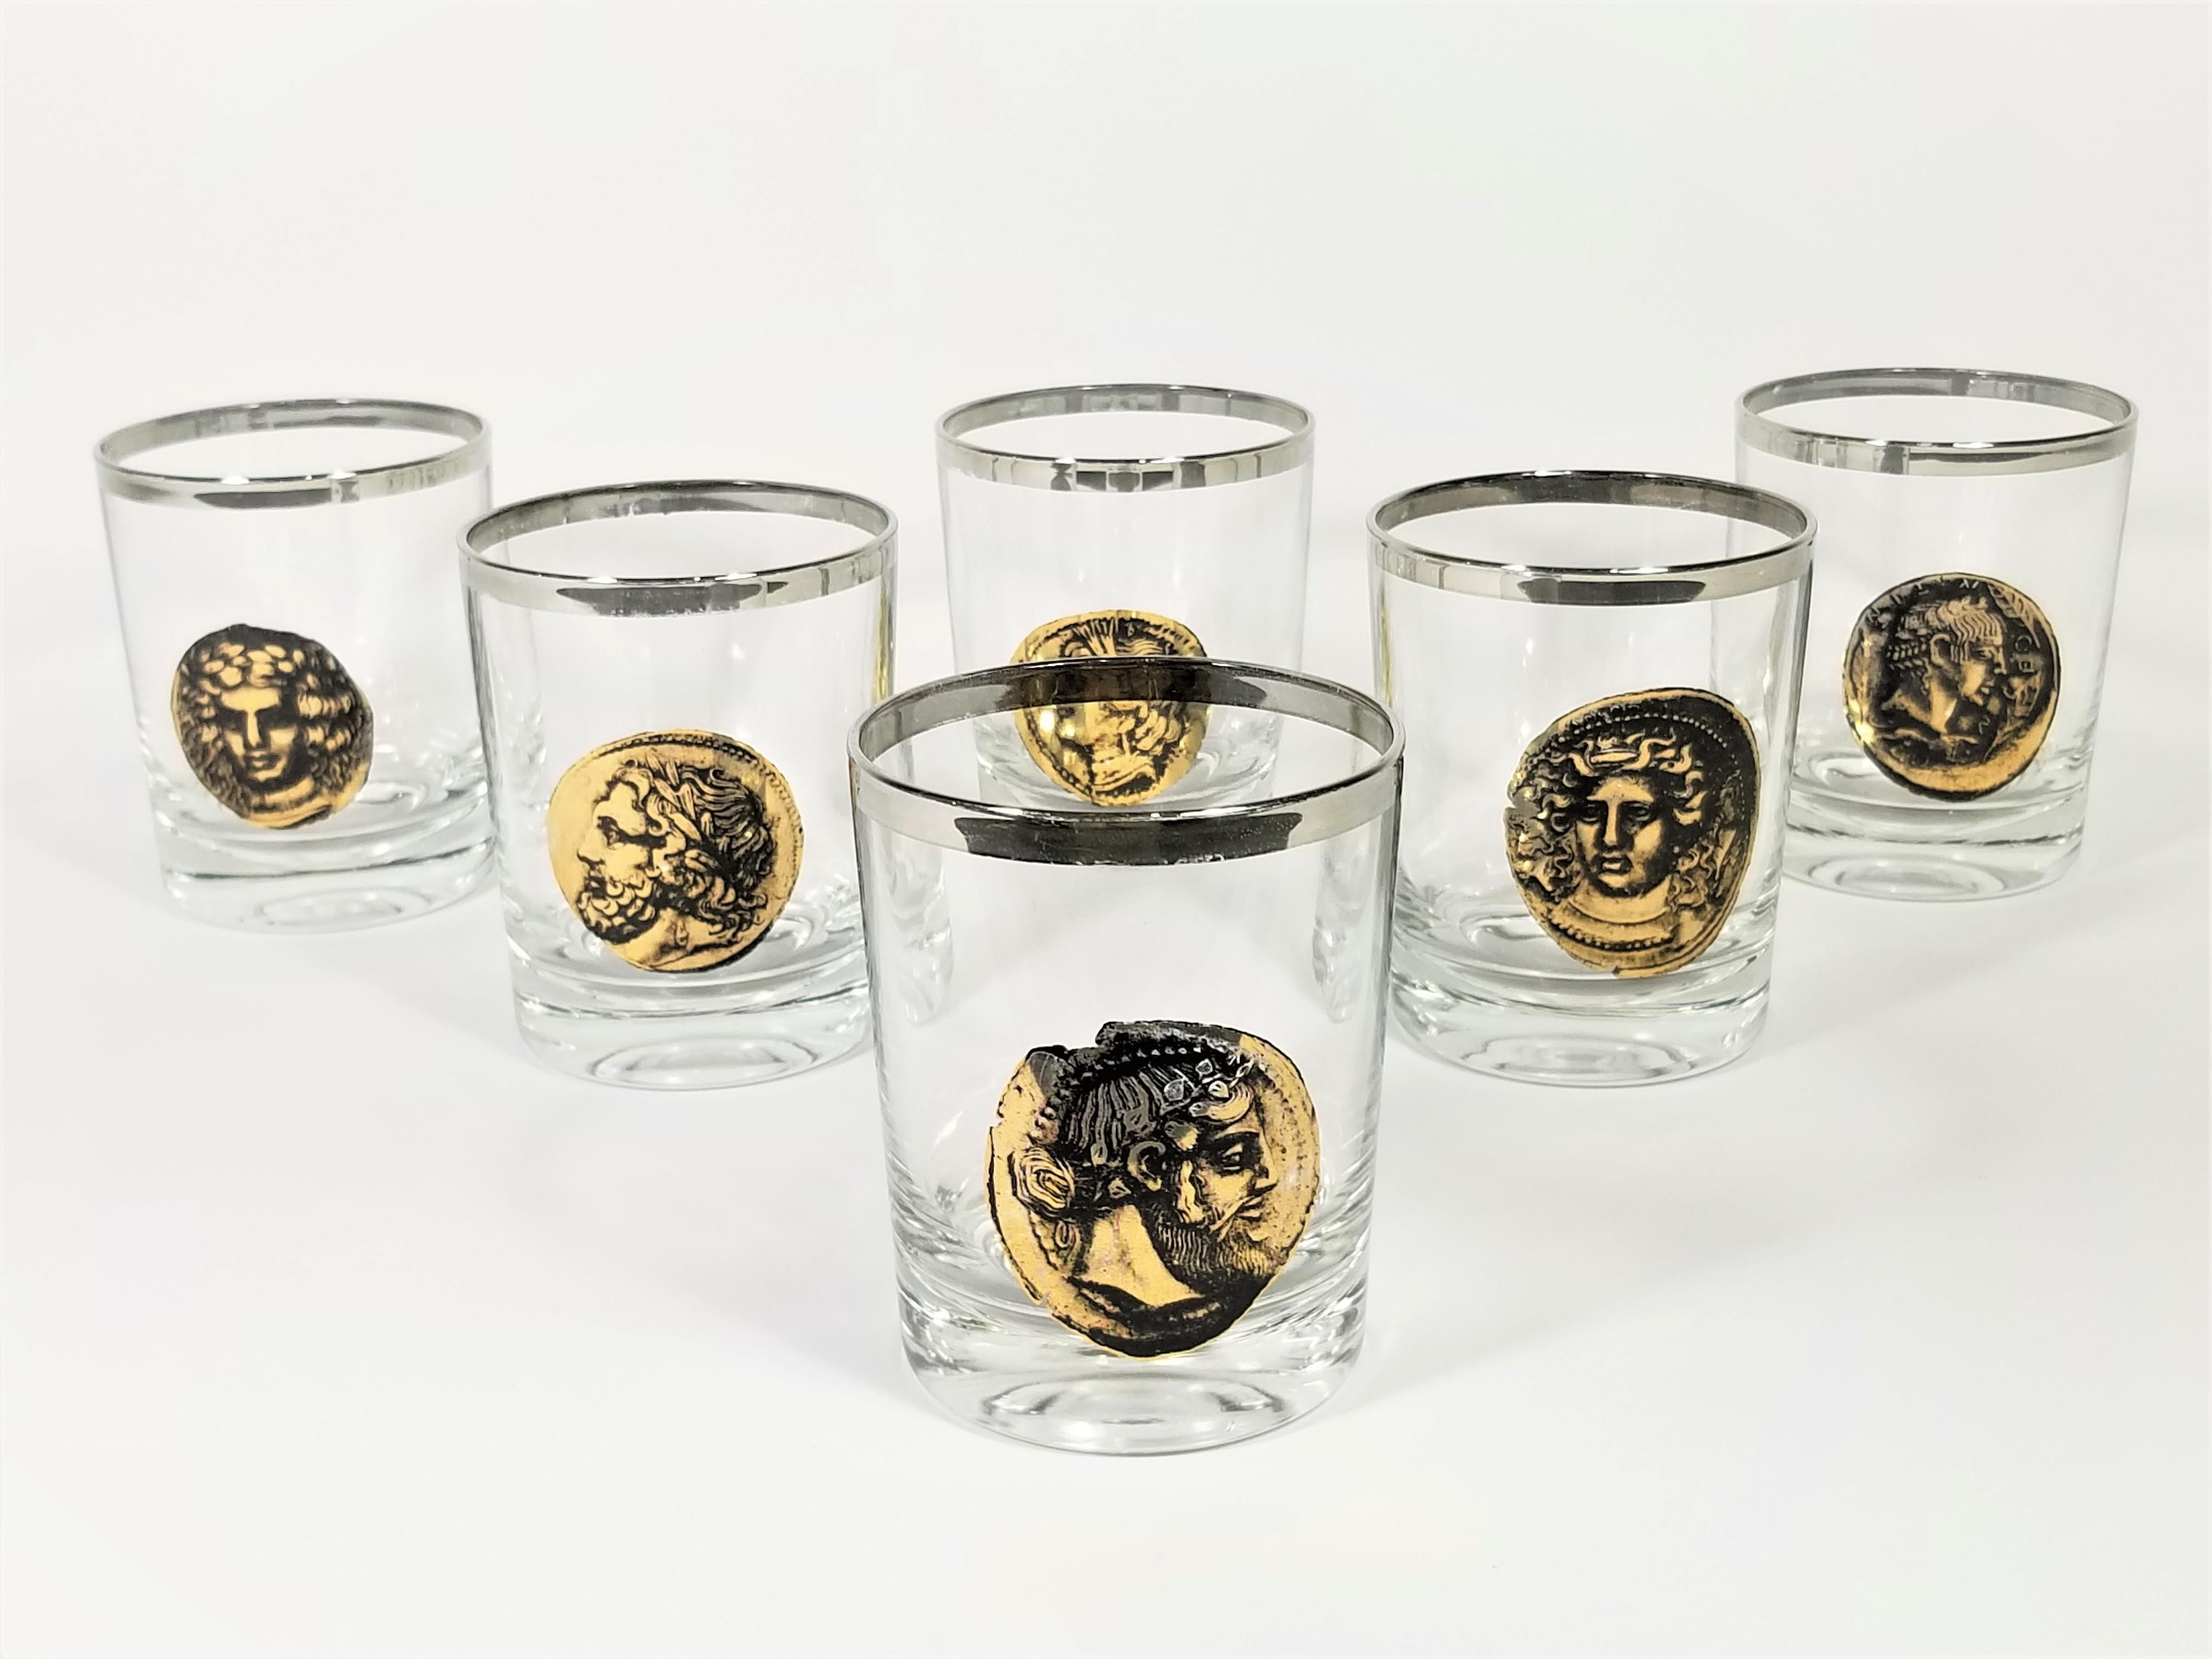 Mid century 1960s Greek Roman Mythology Gods Glassware Barware. Silver rimmed. All glasses marked Made in France on bottom. Excellent addition to any home bar or bar cart.